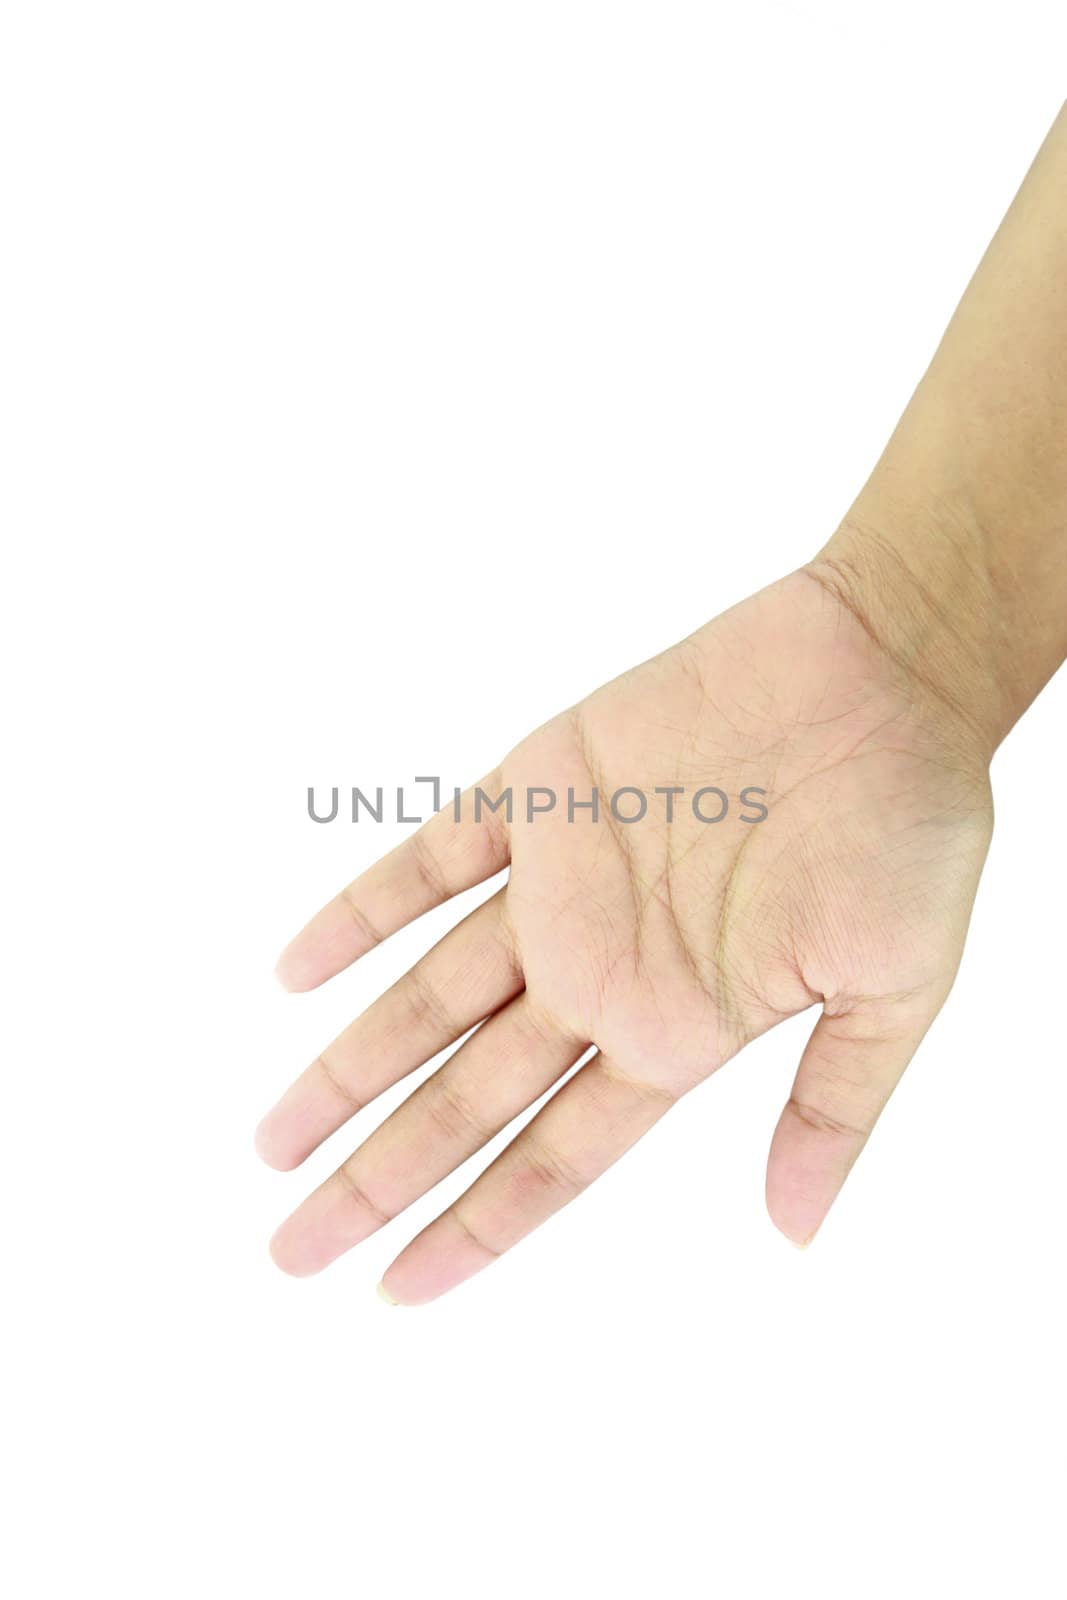 hand symbol that means five on white background